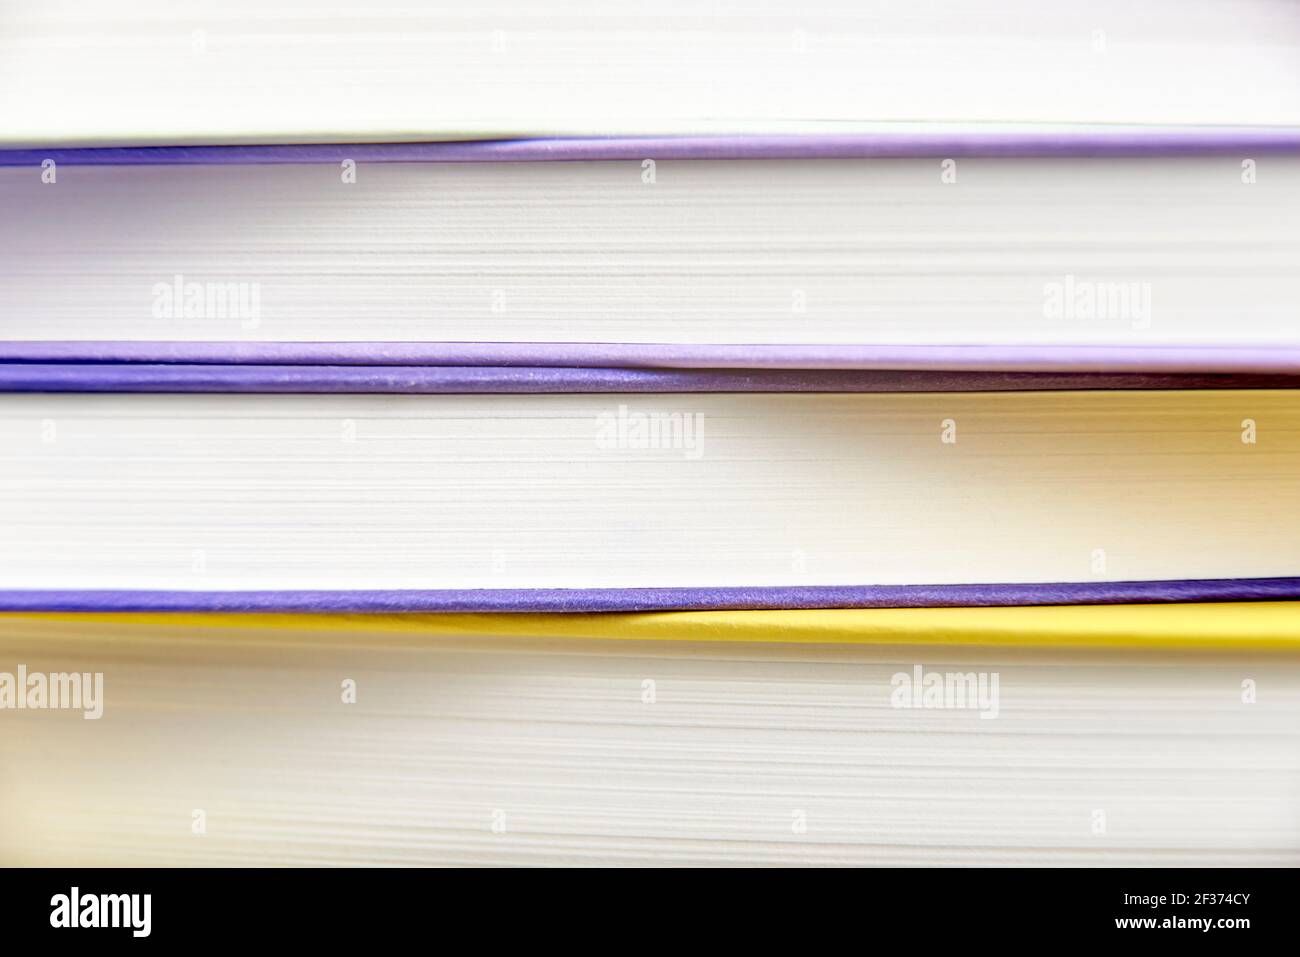 Geometric background, close-up front view of a stack of books filling the frame. Colored lines and white stripes. Stock Photo